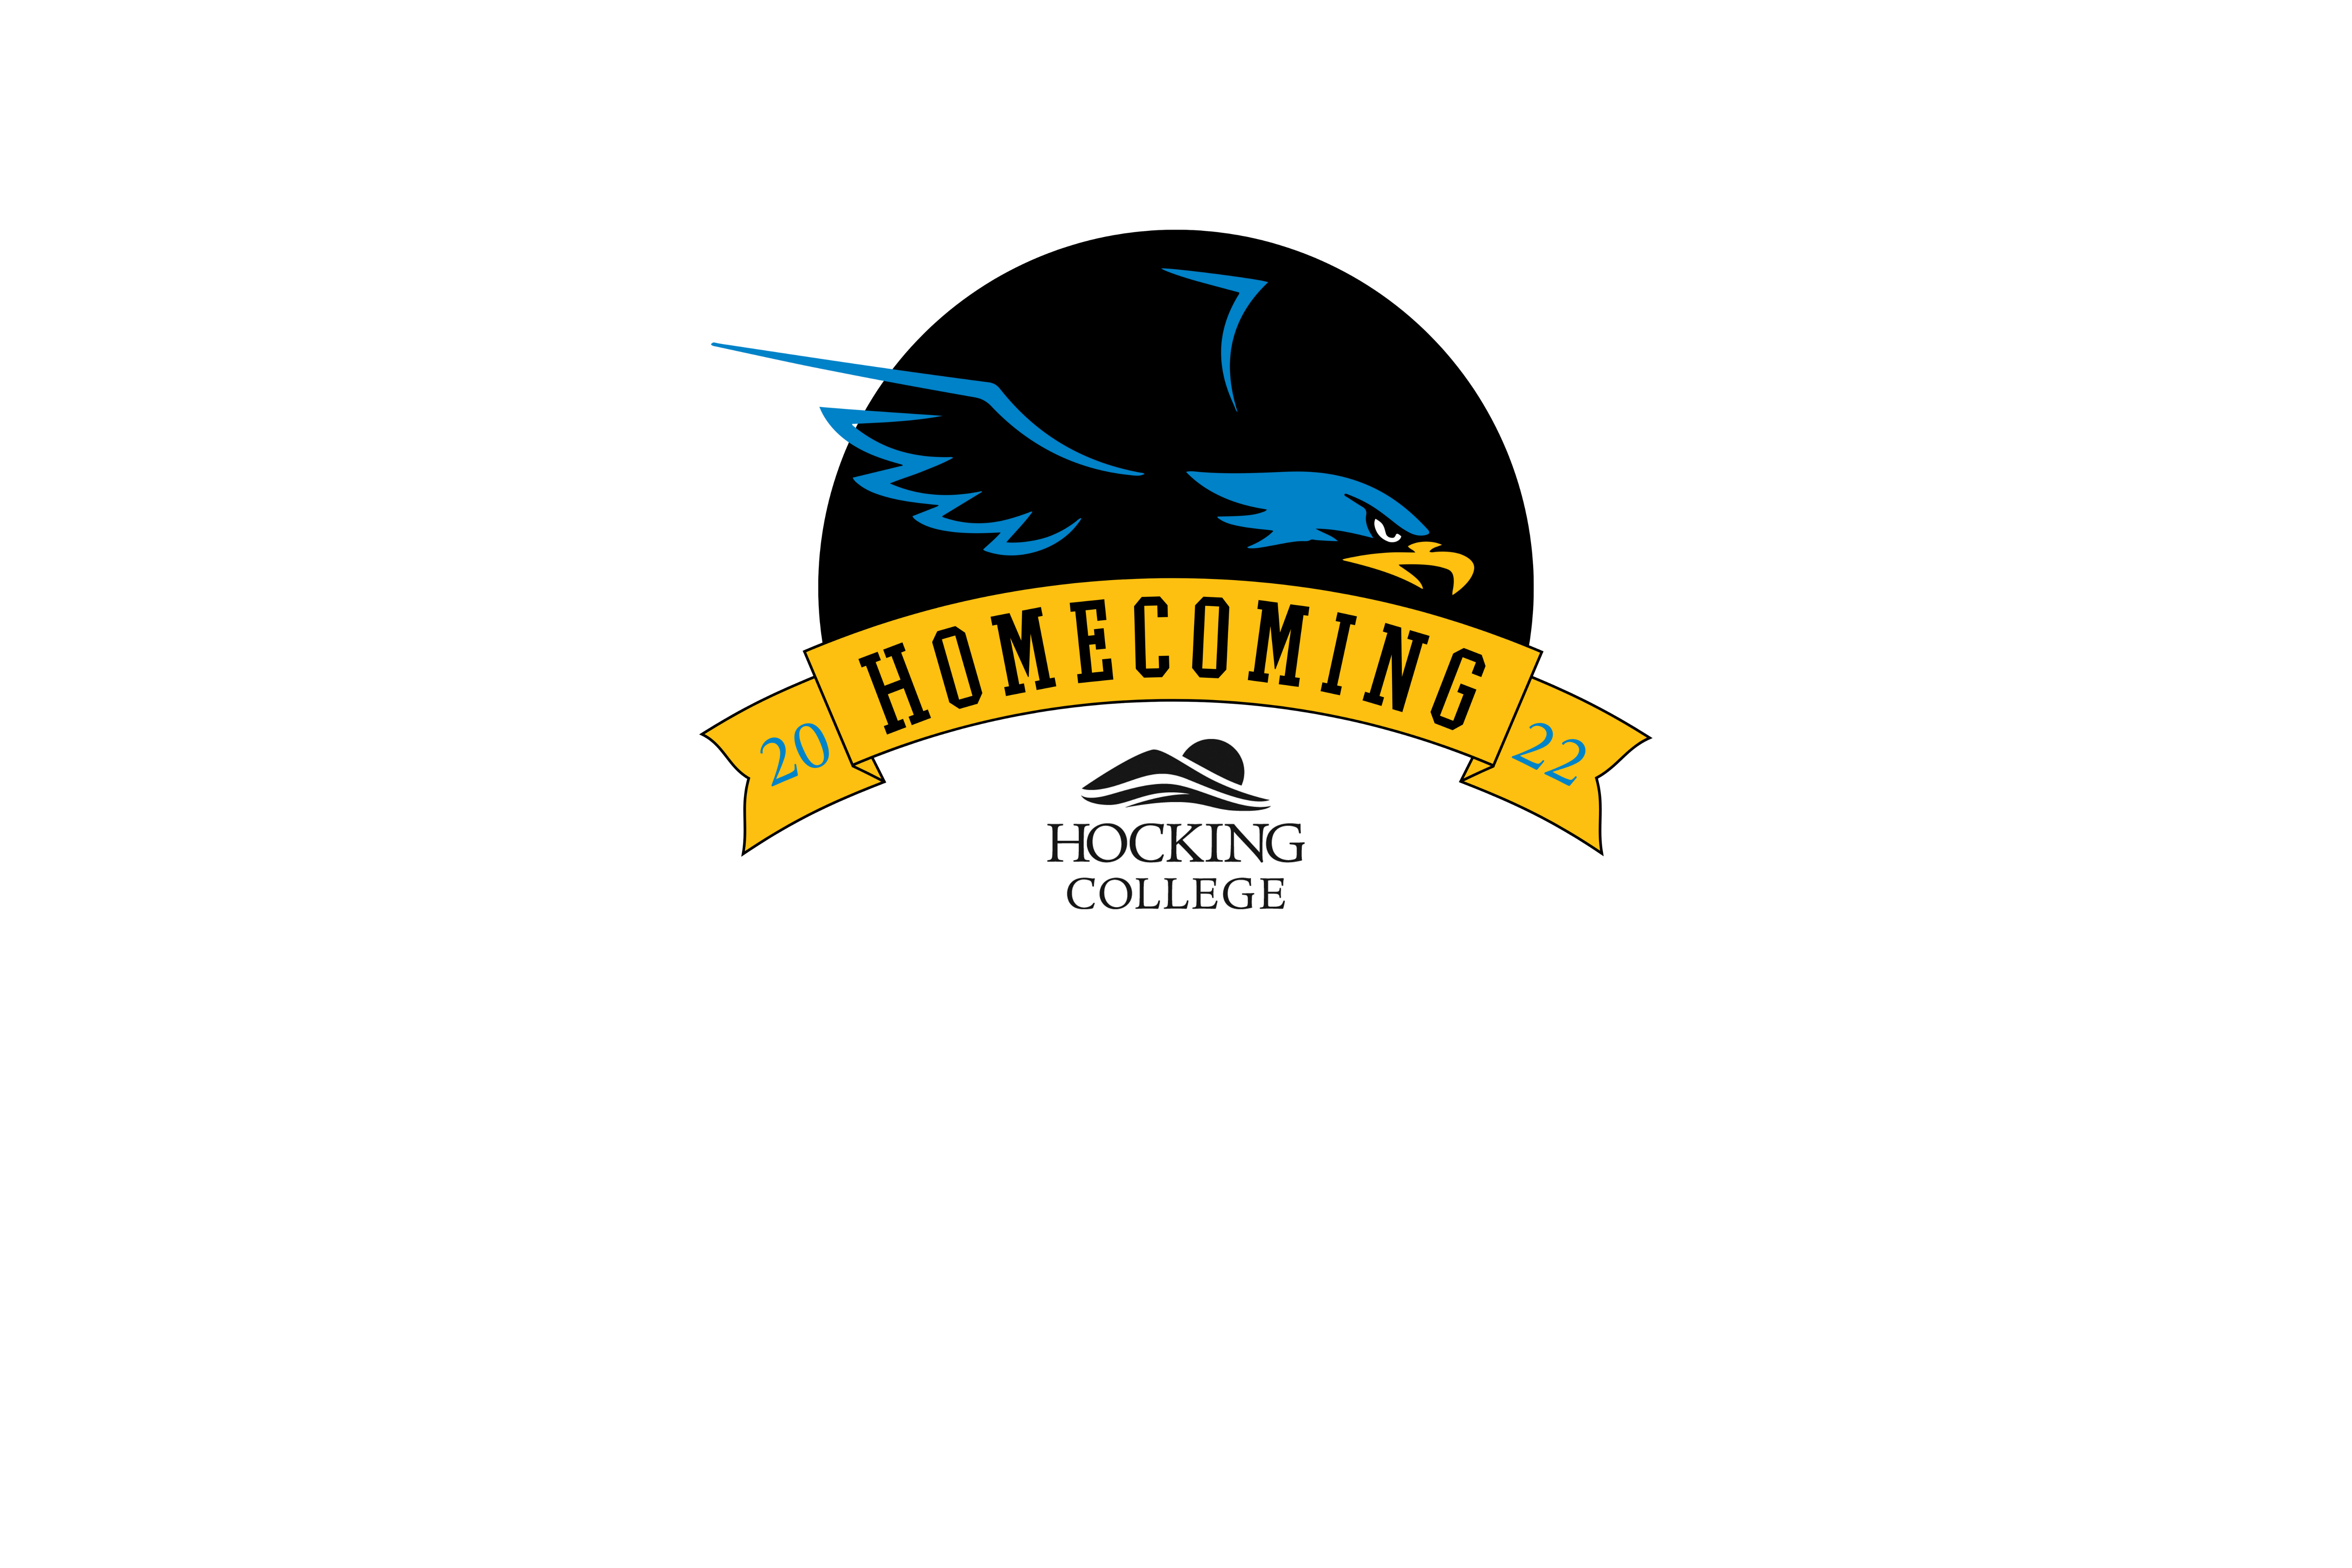 Copy of Homecoming Logo (6000 × 4000 px) (3)